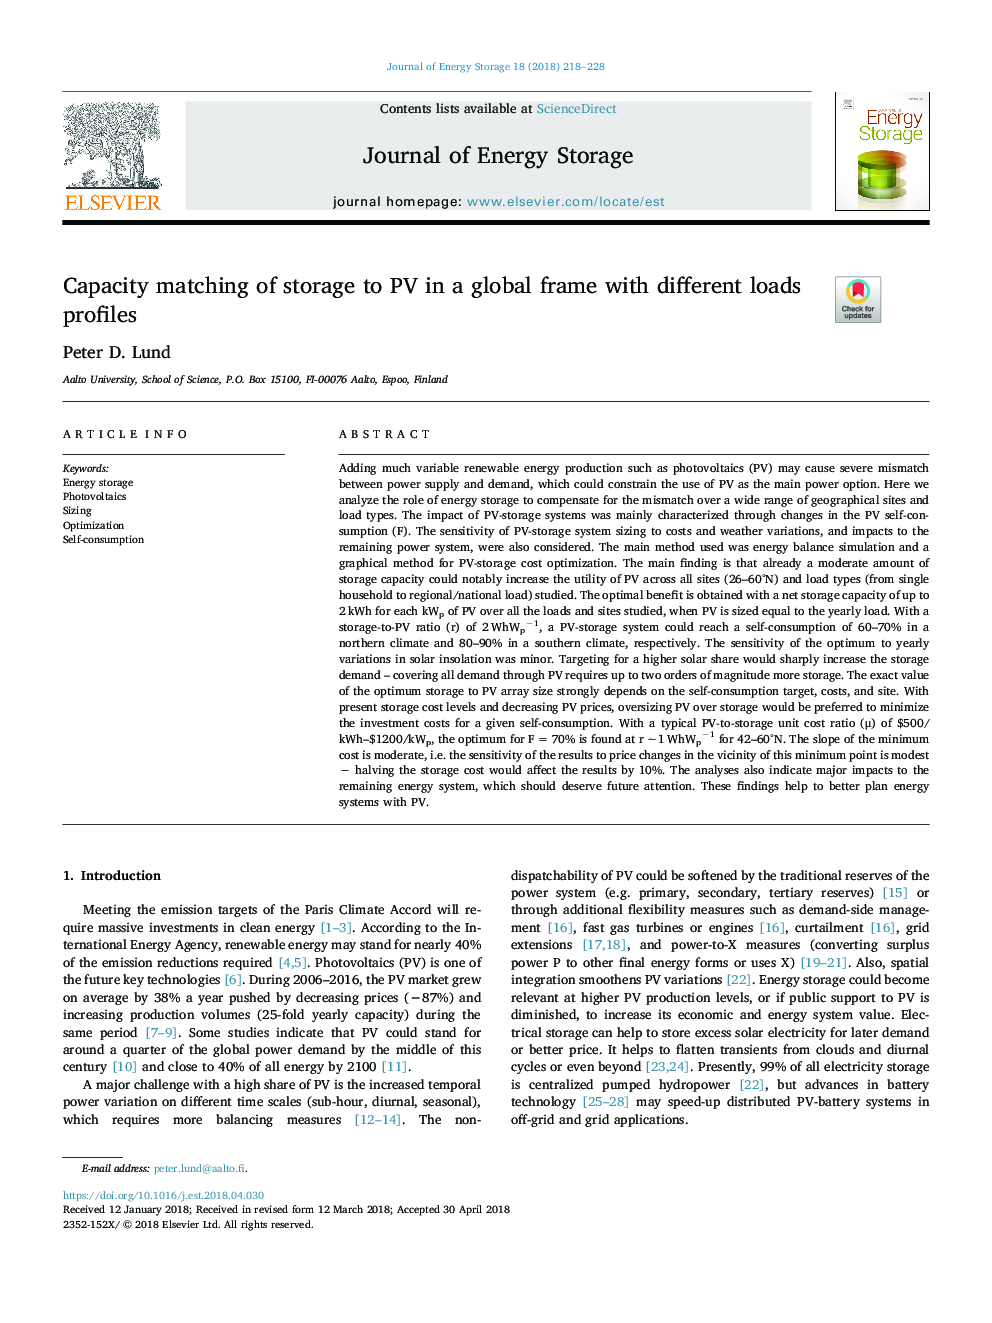 Capacity matching of storage to PV in a global frame with different loads profiles